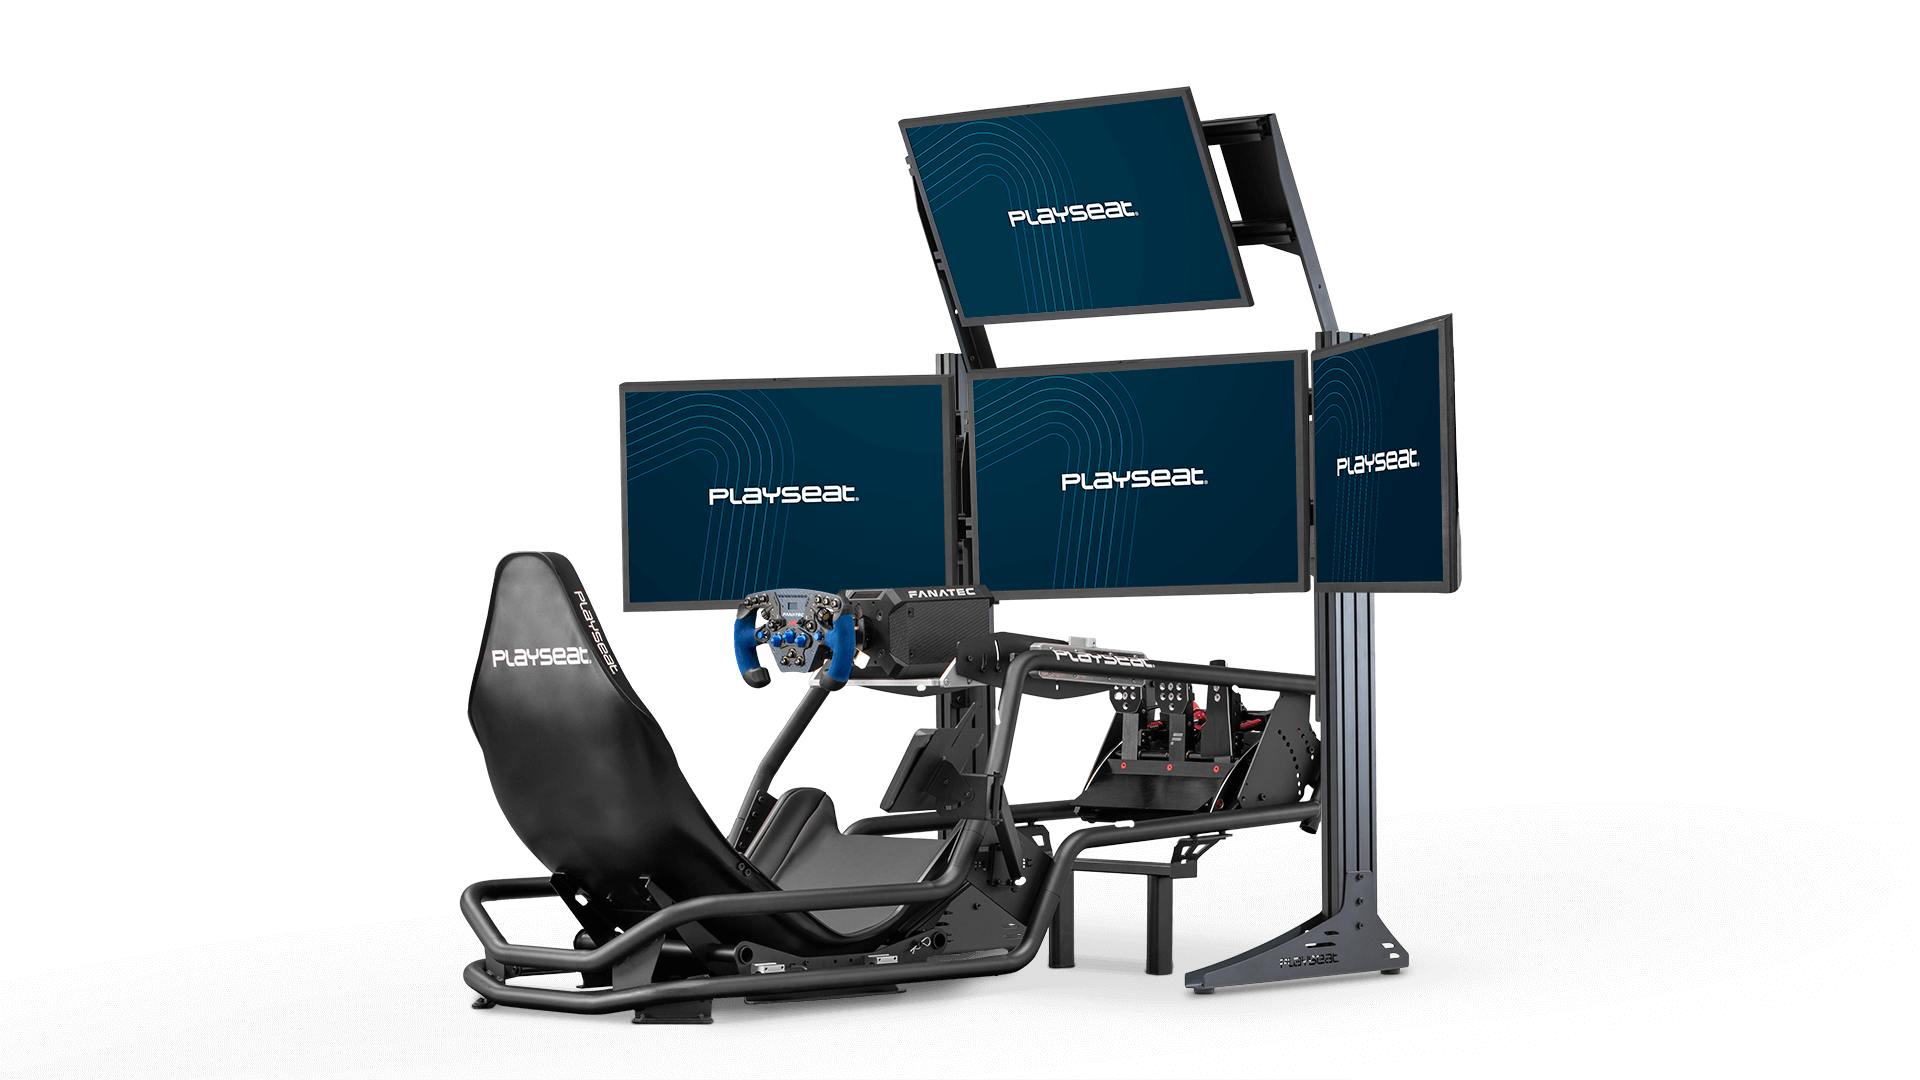 playseat-tv-stand-xl-multi-with-playseat-formula-intelligence-black-fanatec-podium-racing-wheel-official-f1-1920x1080.png